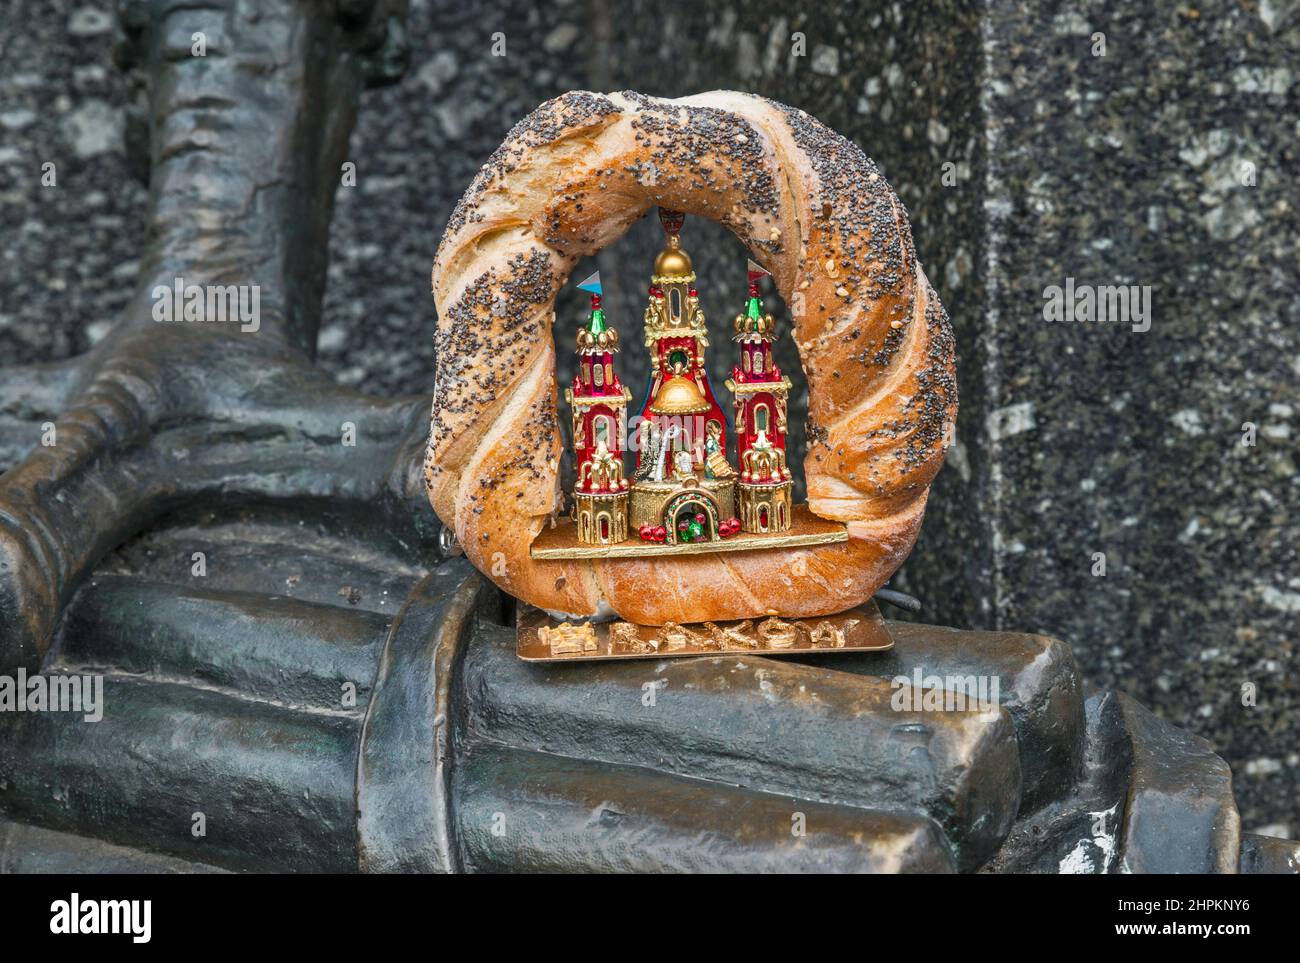 Kraków Szopka nativity scene displayed inside a pretzel, winner in miniature category, during annual contest in December, event included in UNESCO Cultural Heritage list, at Adam Mickiewicz monument, Main Market Square, Kraków, Poland Stock Photo